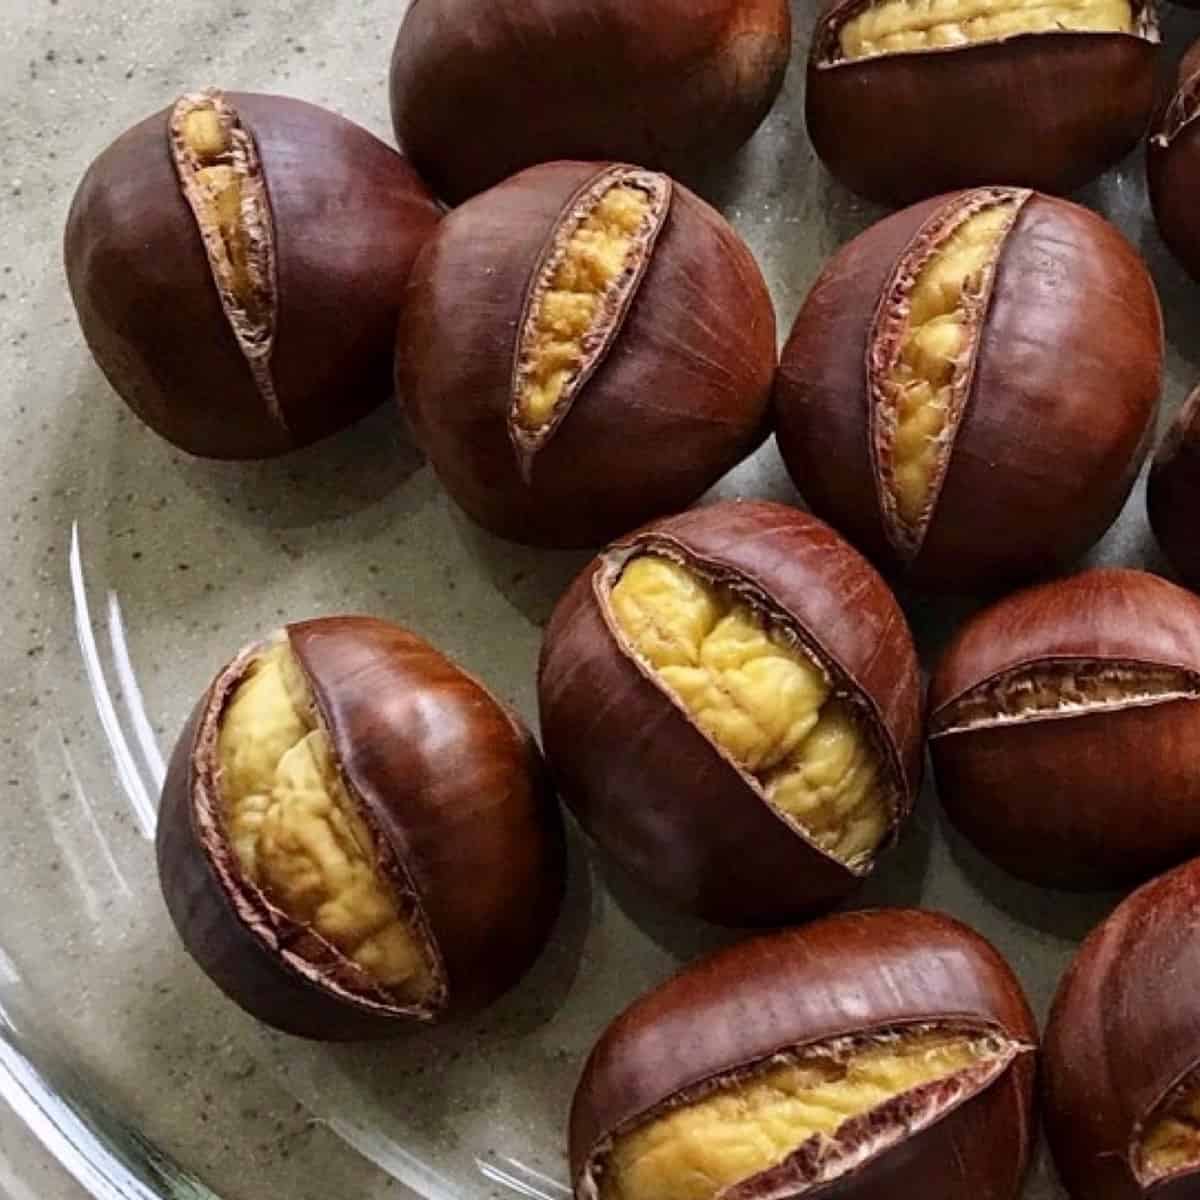 Roasted chestnuts on a glass plate.